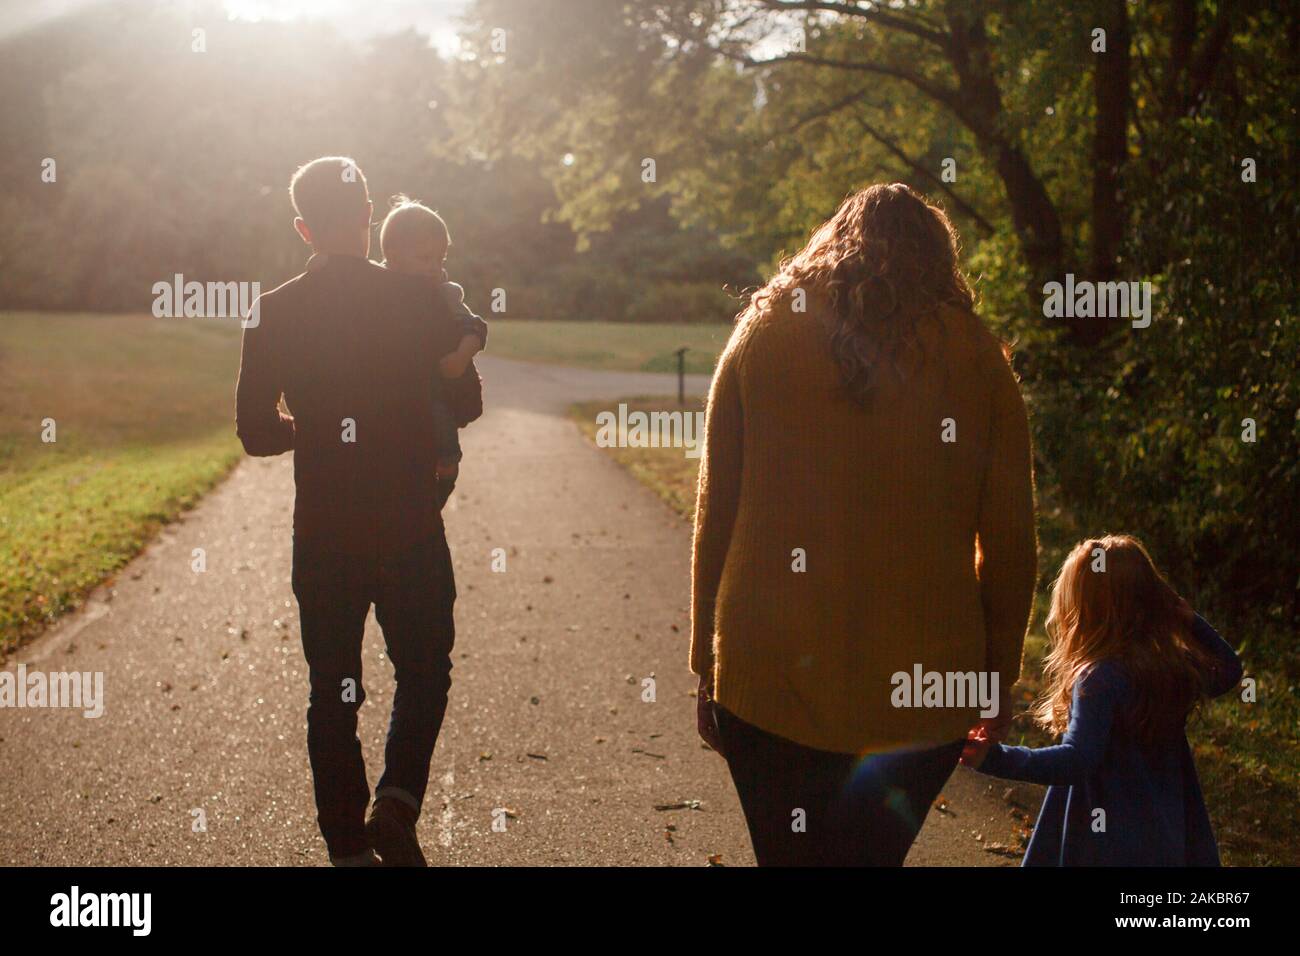 A family walks together holding hands in a park in the setting sun Stock Photo